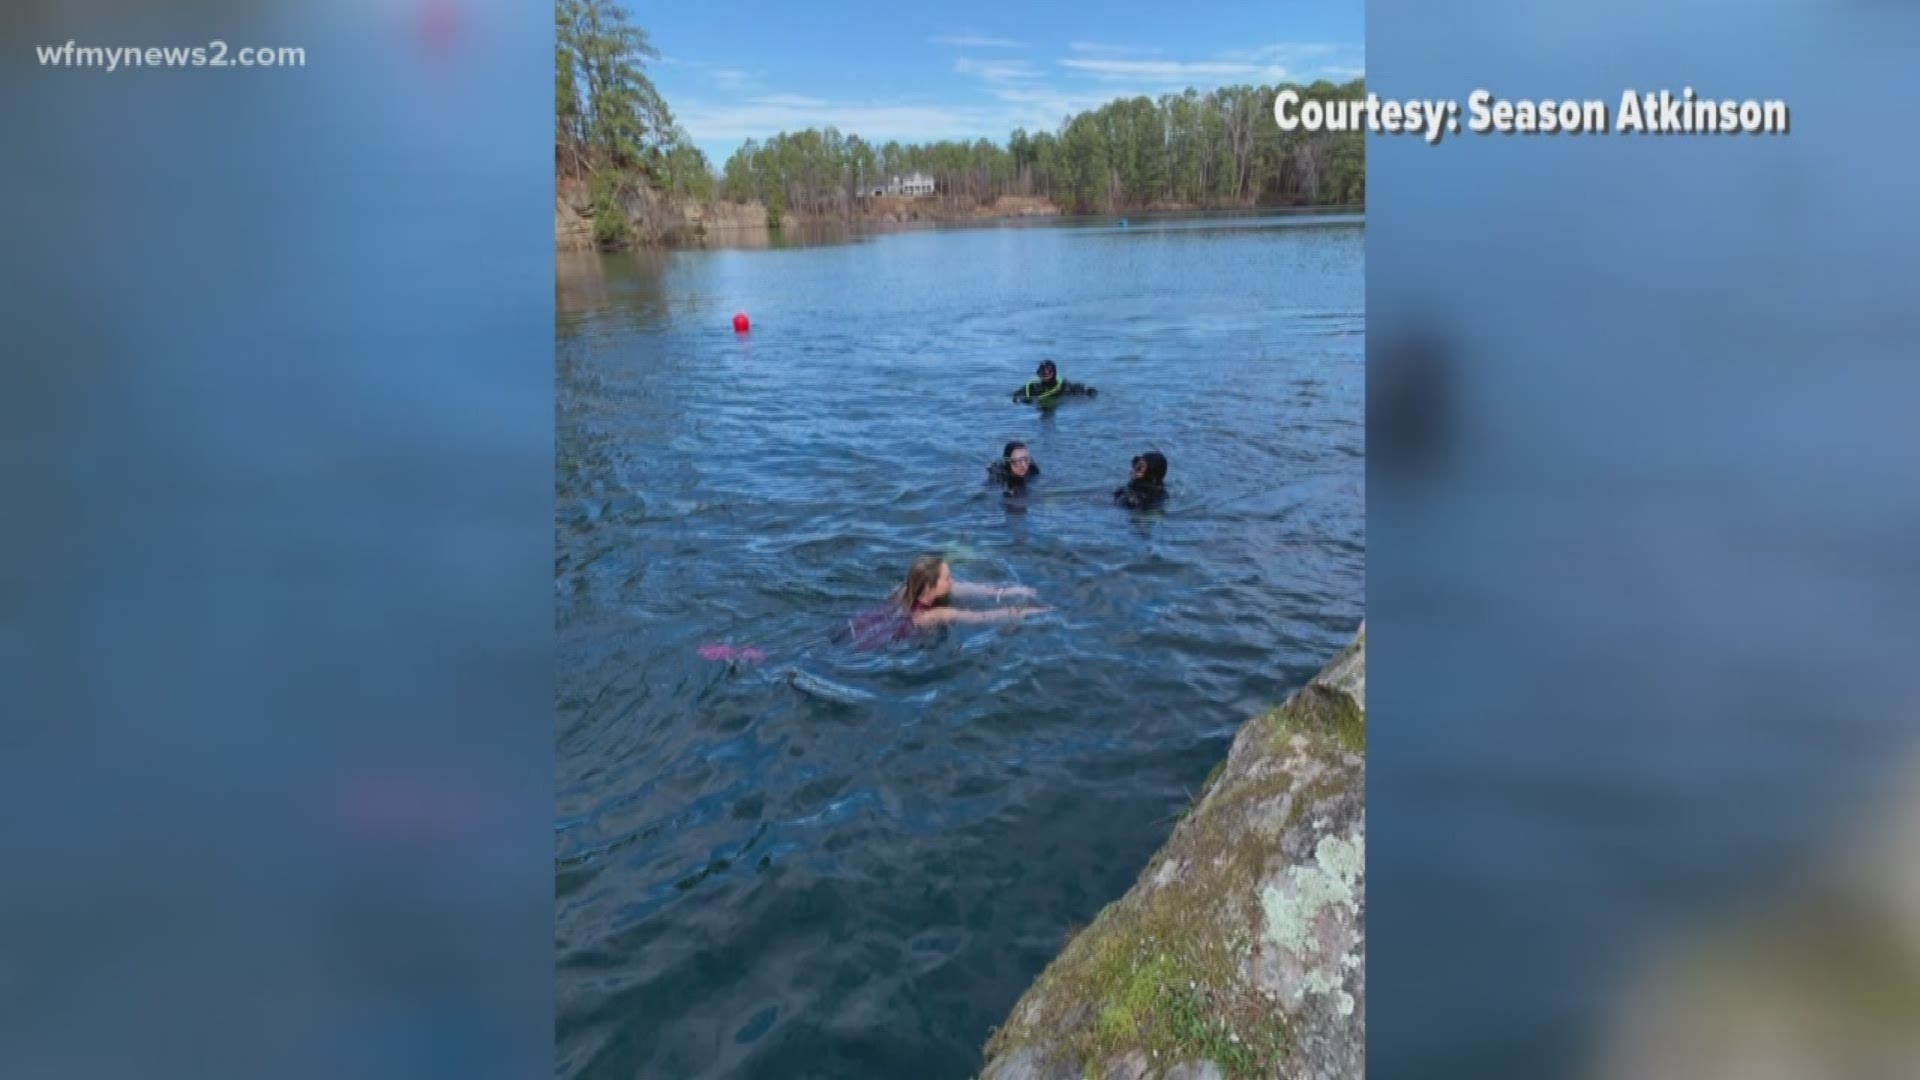 They gathered at Mystery Lake Park to dive into frigid water.